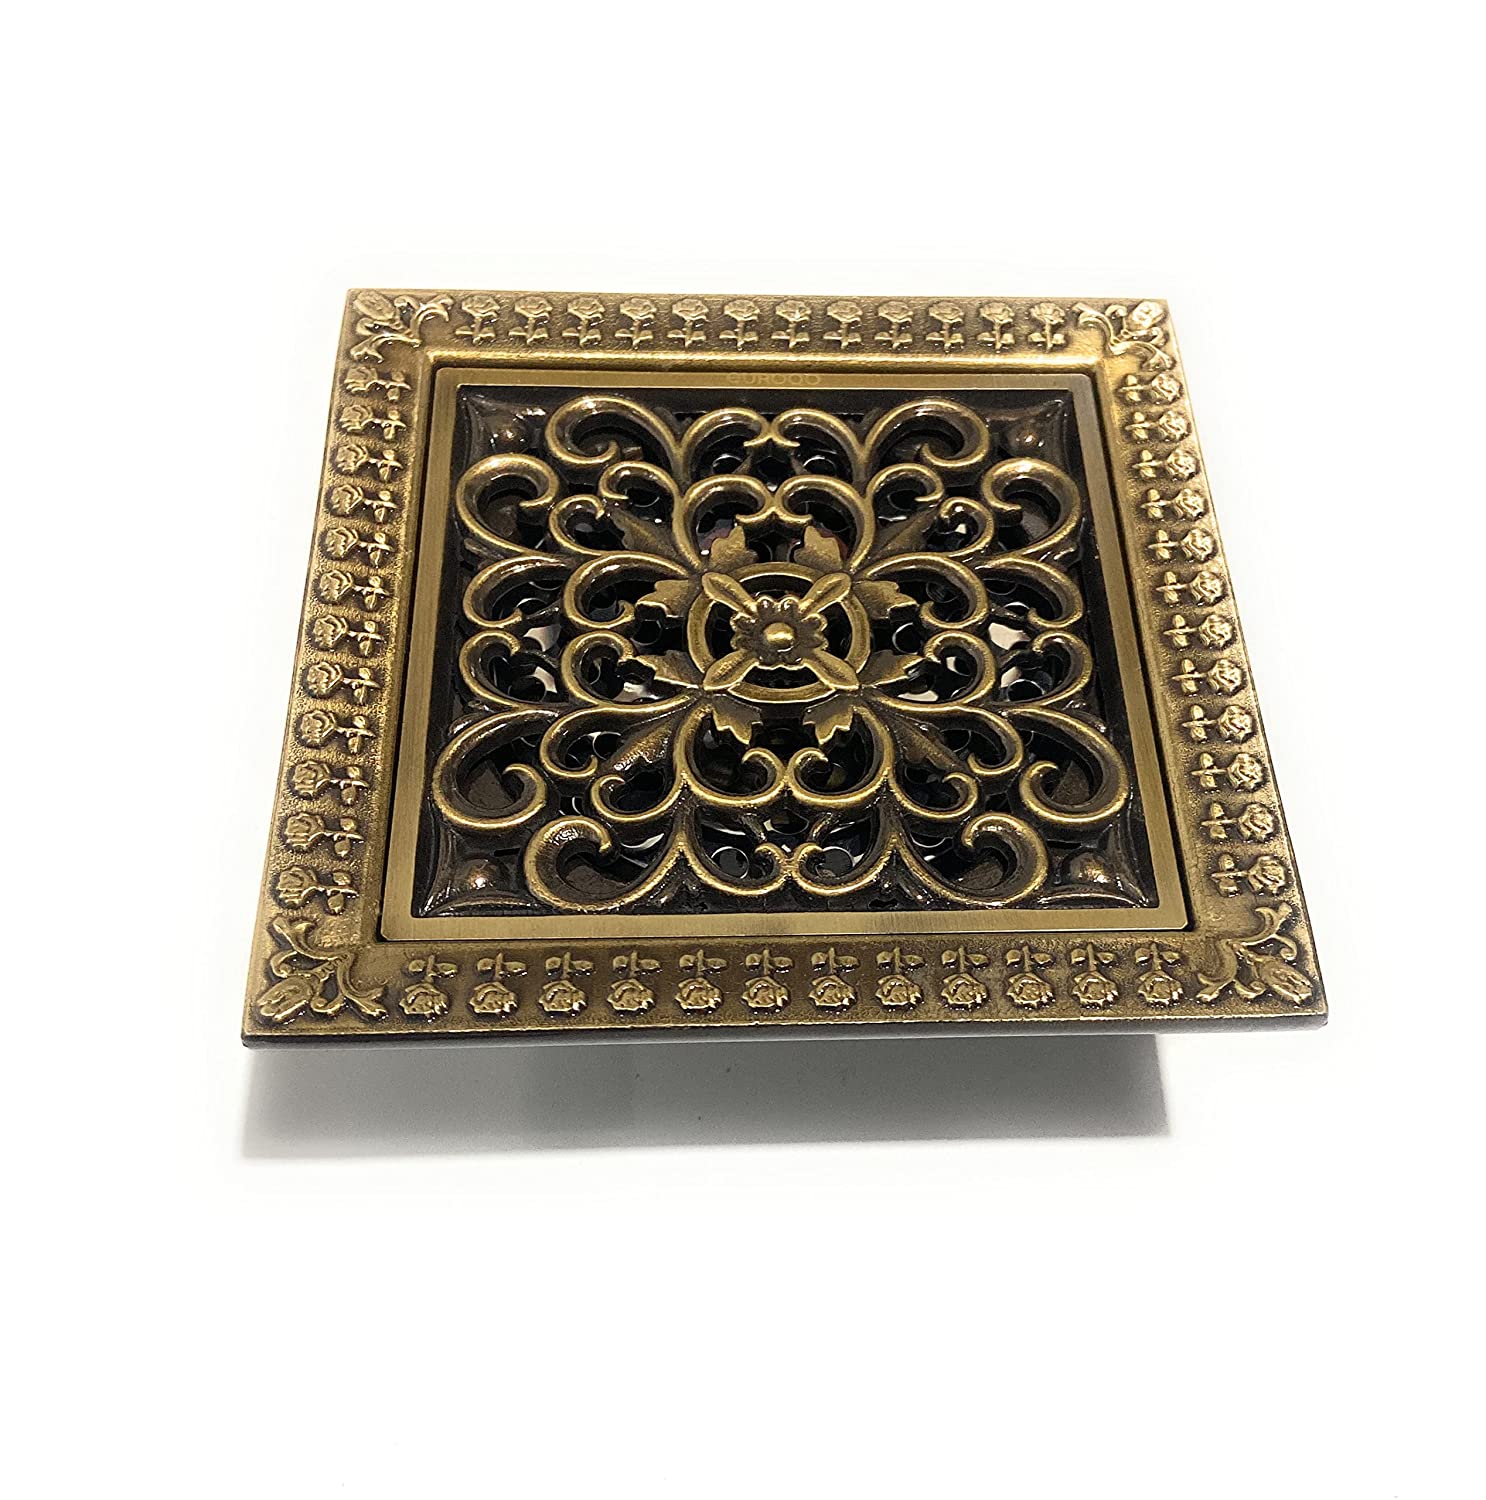 B Backline  Brass Antique Finish Floral Pattern Bathroom Floor Water Drain Grating with Anti-Foul Cockroach Trap